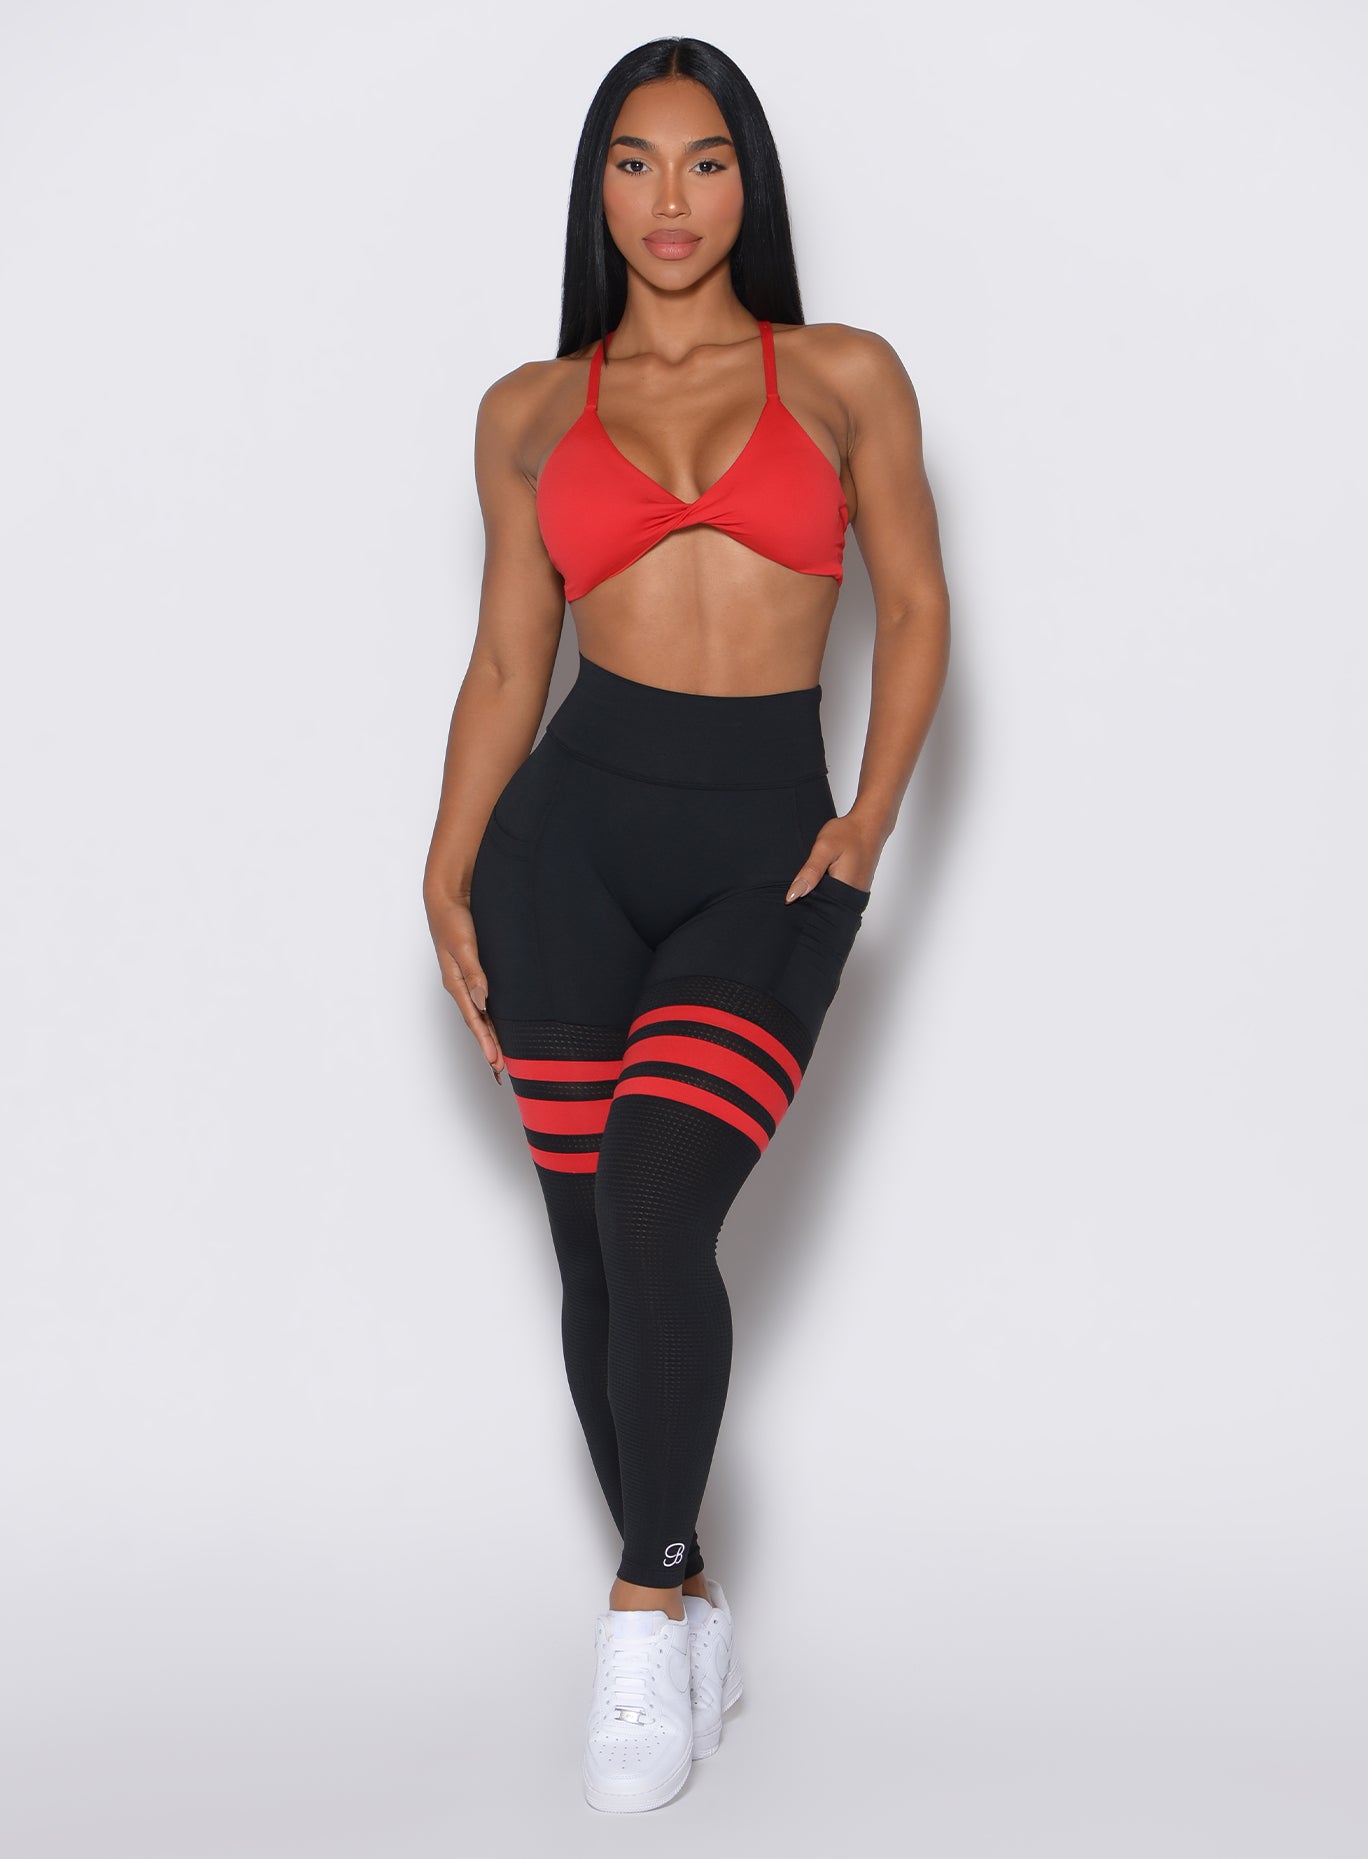 Front profile shot of a model with her left hand hand in the pocket of the leggings wearing the Scrunch Thigh Highs in Black Fire color along with the matching top